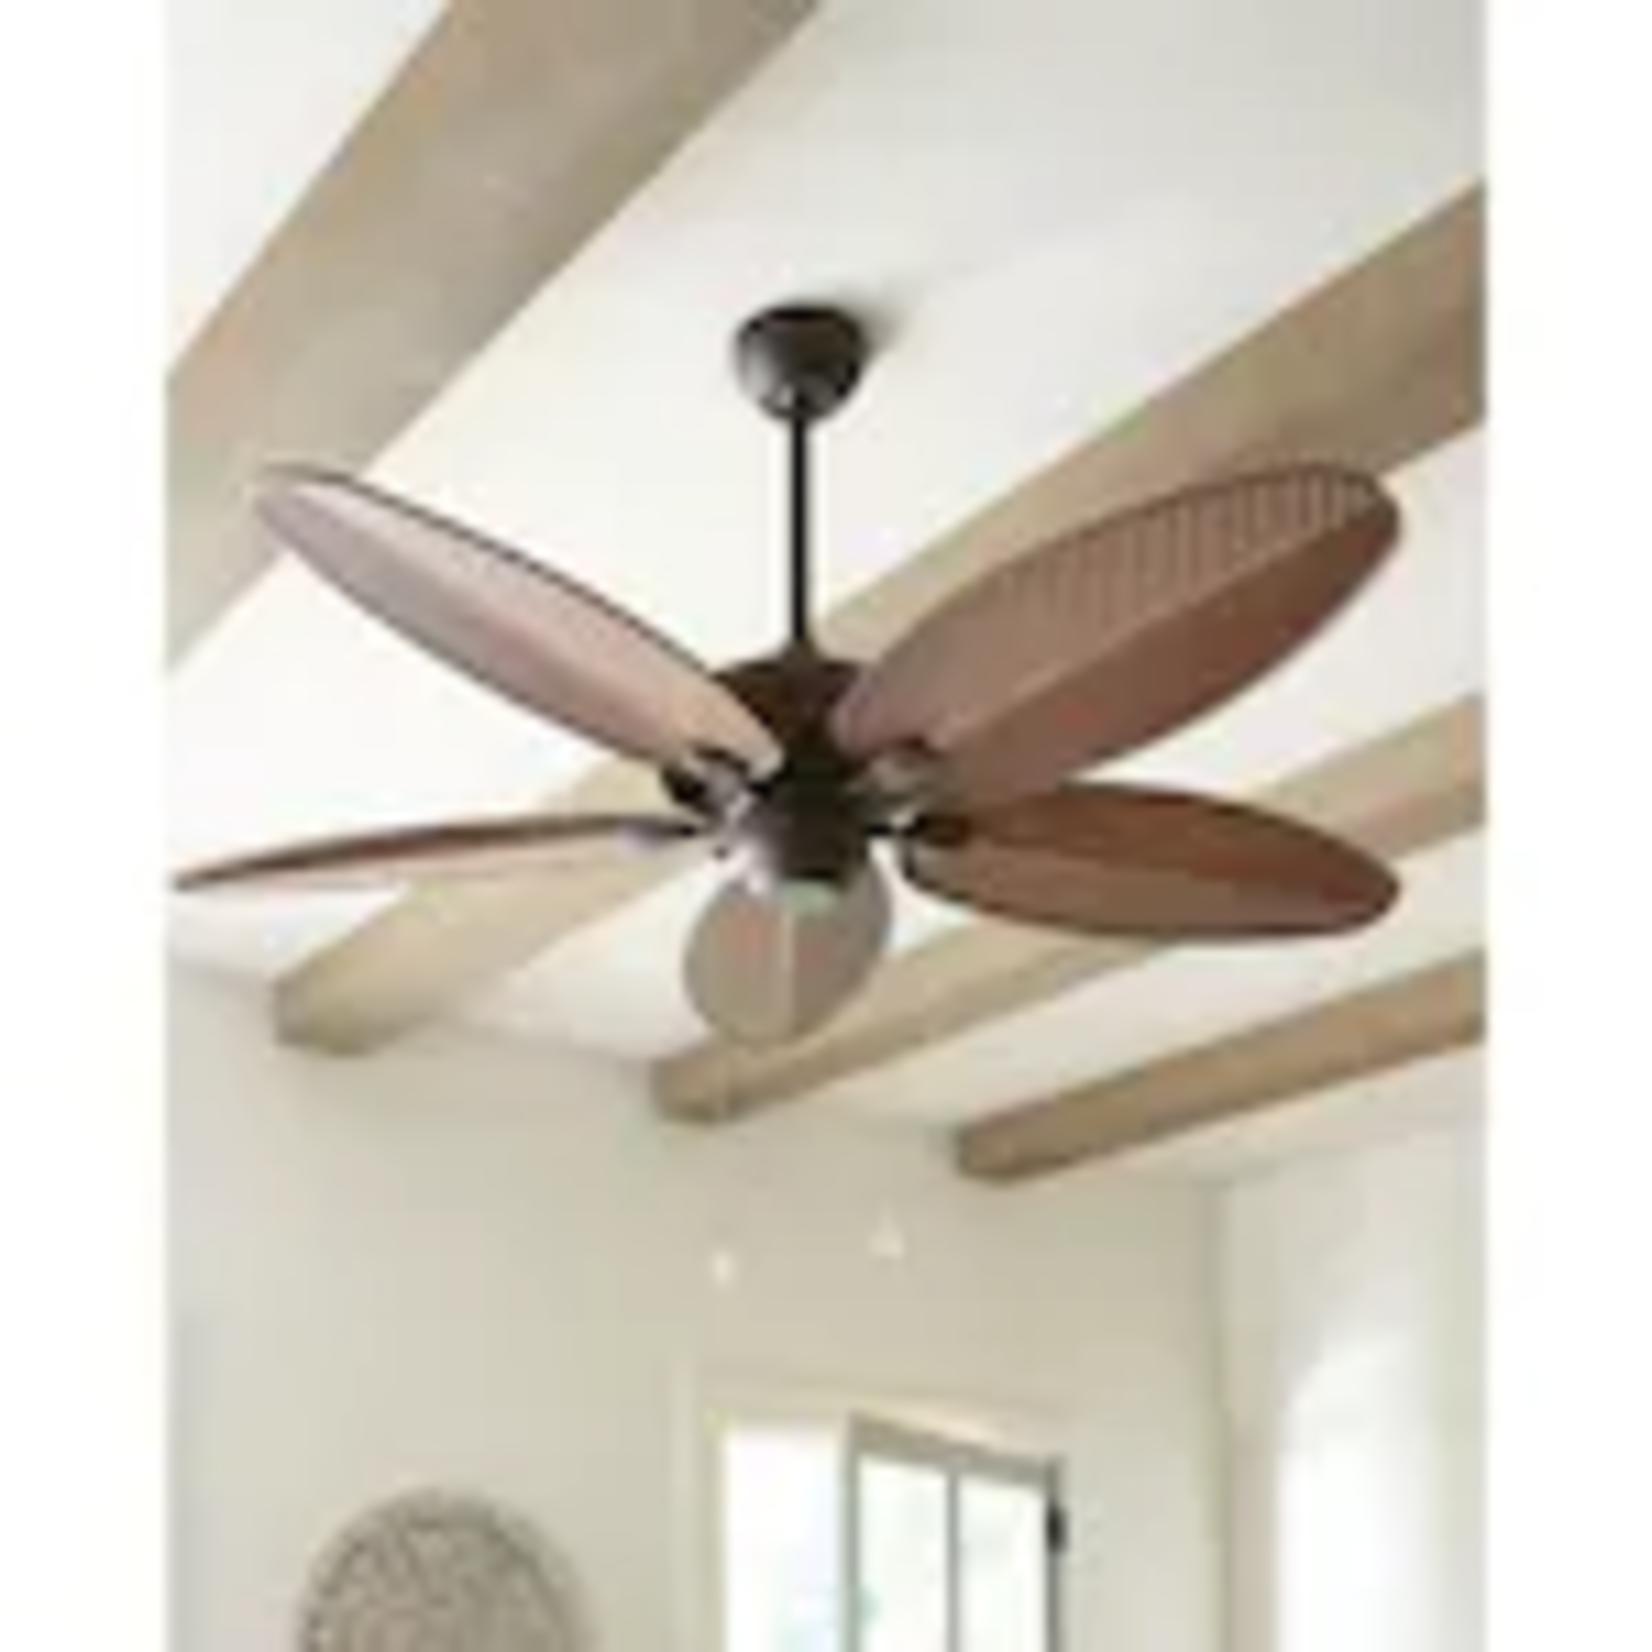 Monte Carlo Fans Cruise 52-inch Indoor/Outdoor Roman Bronze Ceiling Fan with American Walnut Blades**